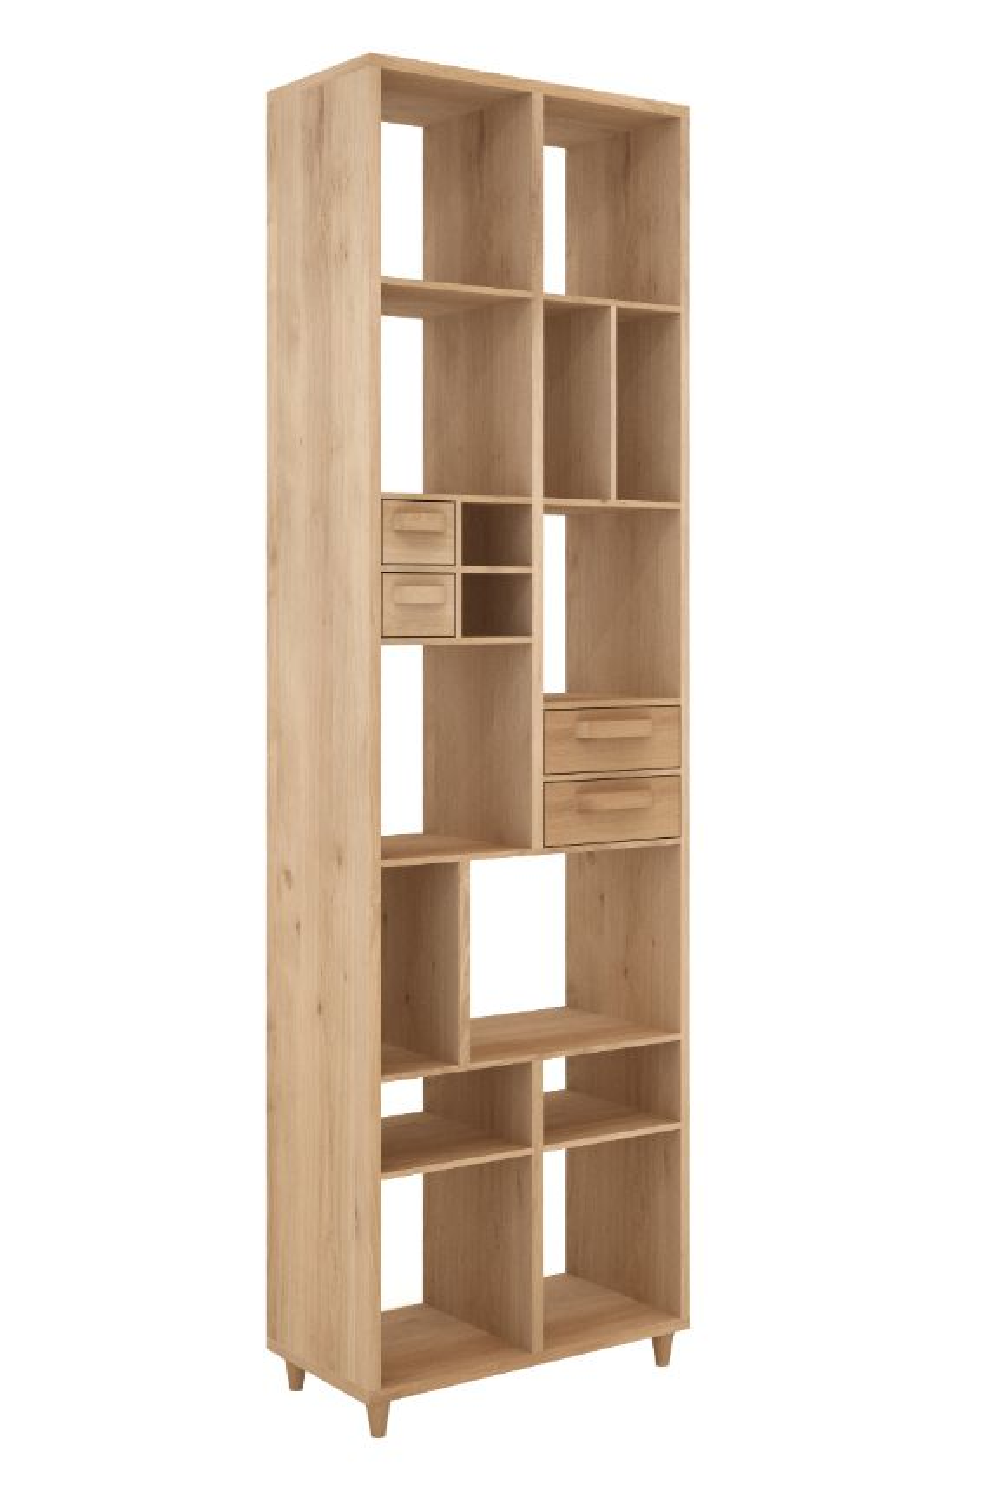 Oak Bookcase With Drawers | Ethnicraft Pirouette | Oroa.com